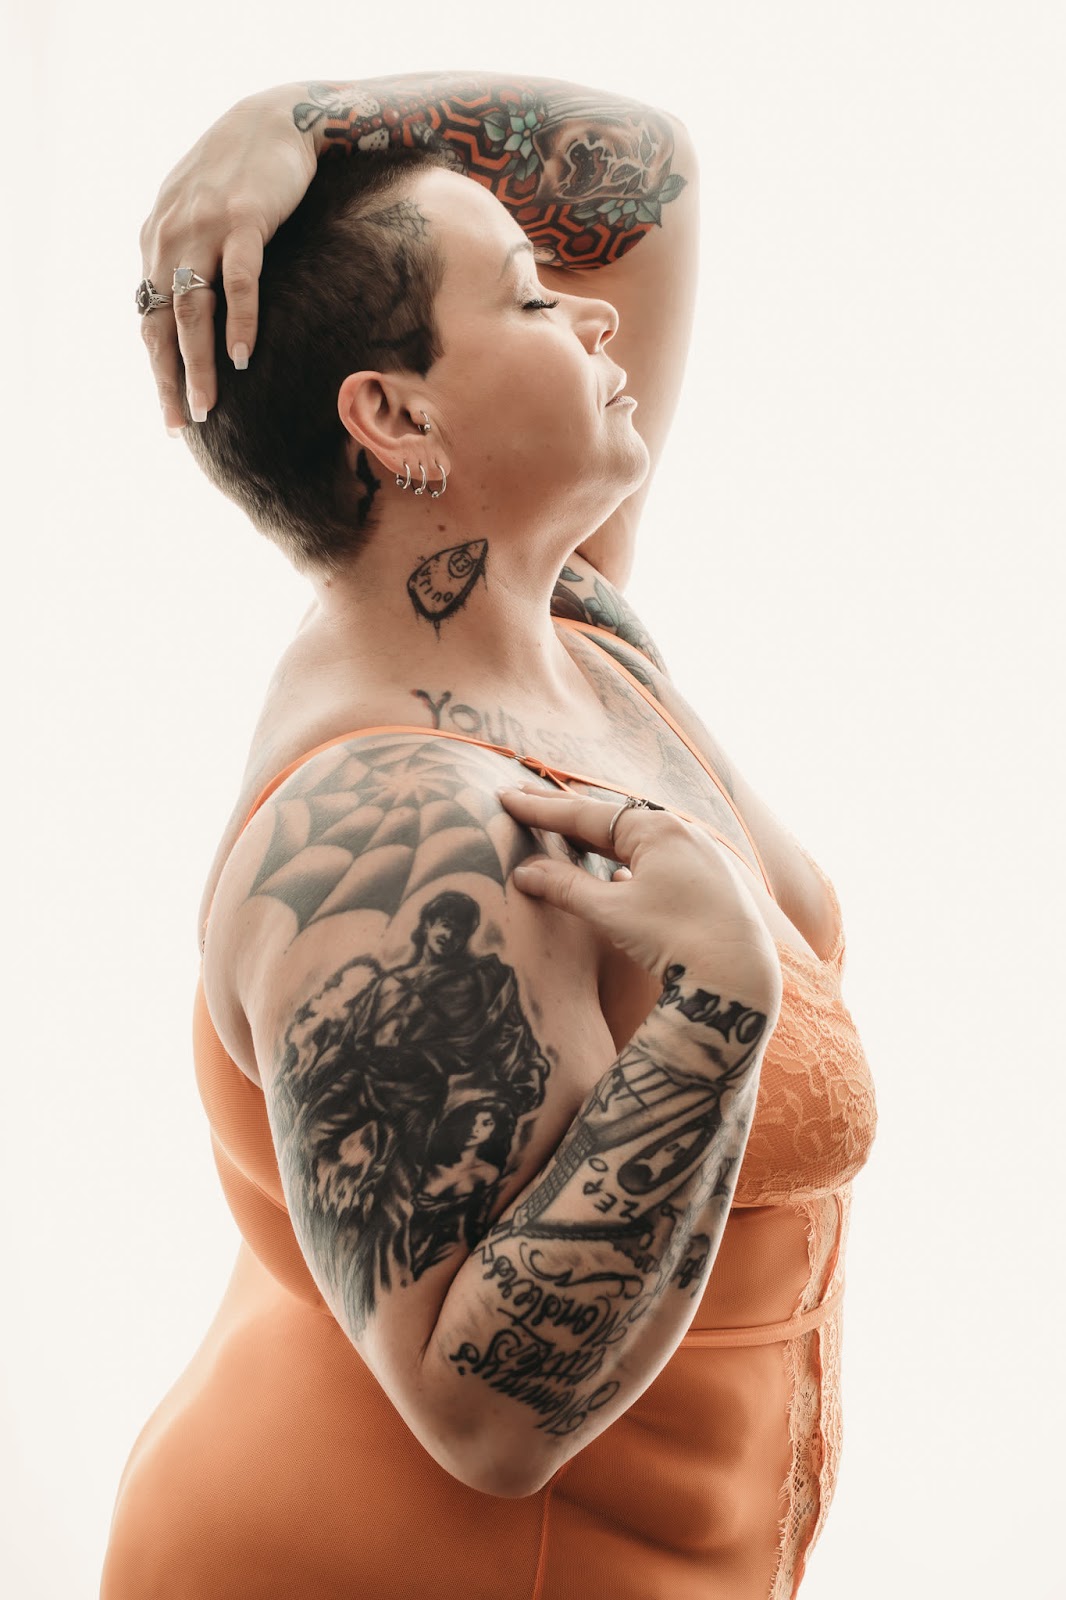 Plus sized woman with shaved head and tattoos stands in front of a high key background. She's wearing an orange bodysuit with lace. Photo by Embodied Art Boudoir. Classic boudoir photography, classic photography, classic boudoir, classy boudoir, classy photography, colorado boudoir, denver boudoir, boulder boudoir, colorado springs boudoir, boudoir ideas, boudoir poses, boudoir inspiration, photography inspiration, boudoir session, boudoir photos